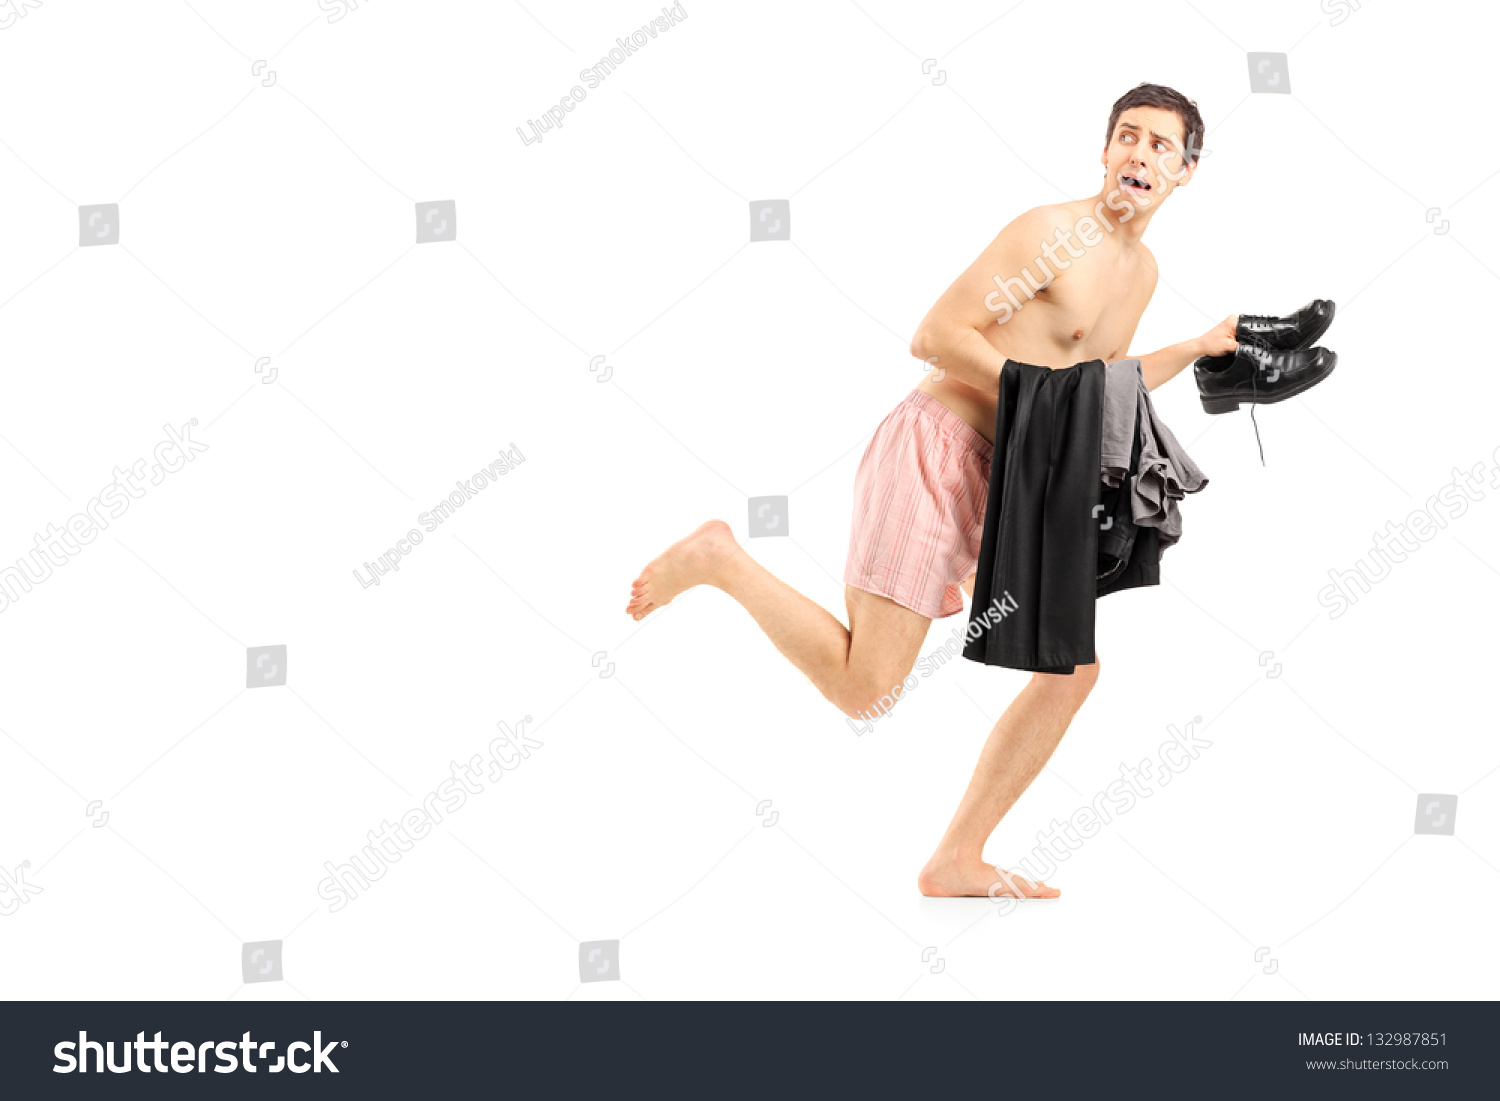 Embarrassed Naked Man Underwear Holding His Stock Photo Shutterstock